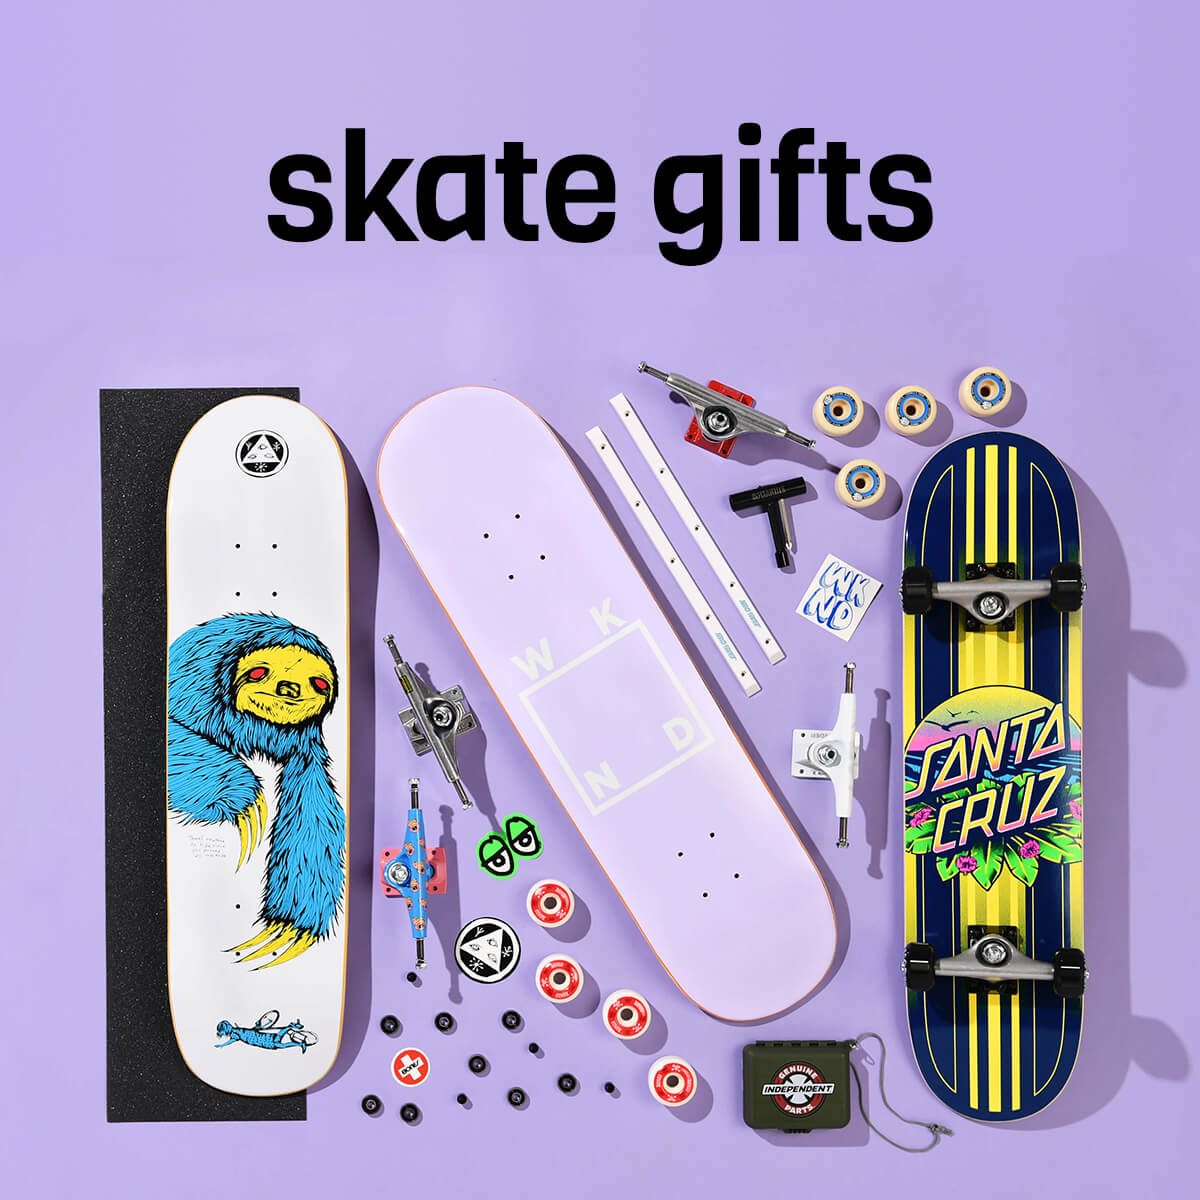 SKATE GIFTS FOR THE SEASON